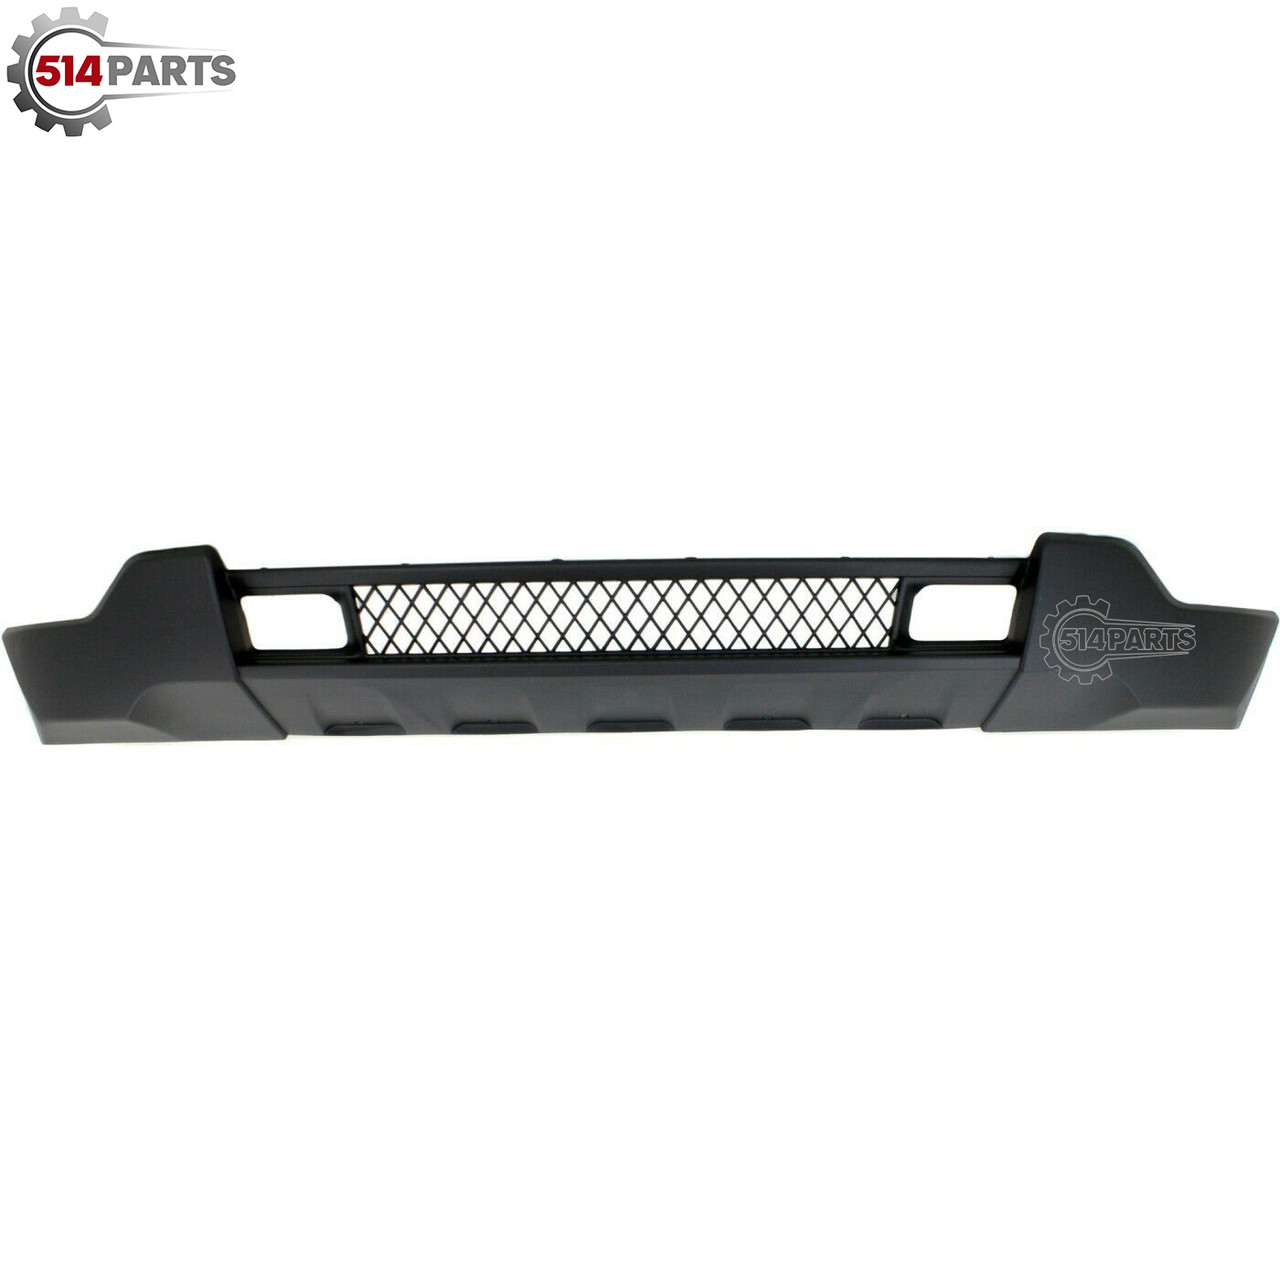 2011 - 2013 JEEP GRAND CHEROKEE FRONT LOWER BUMPER COVER without Adaptive Speed Control for use without CHROME TRIM - PARE-CHOC AVANT INFERIEUR